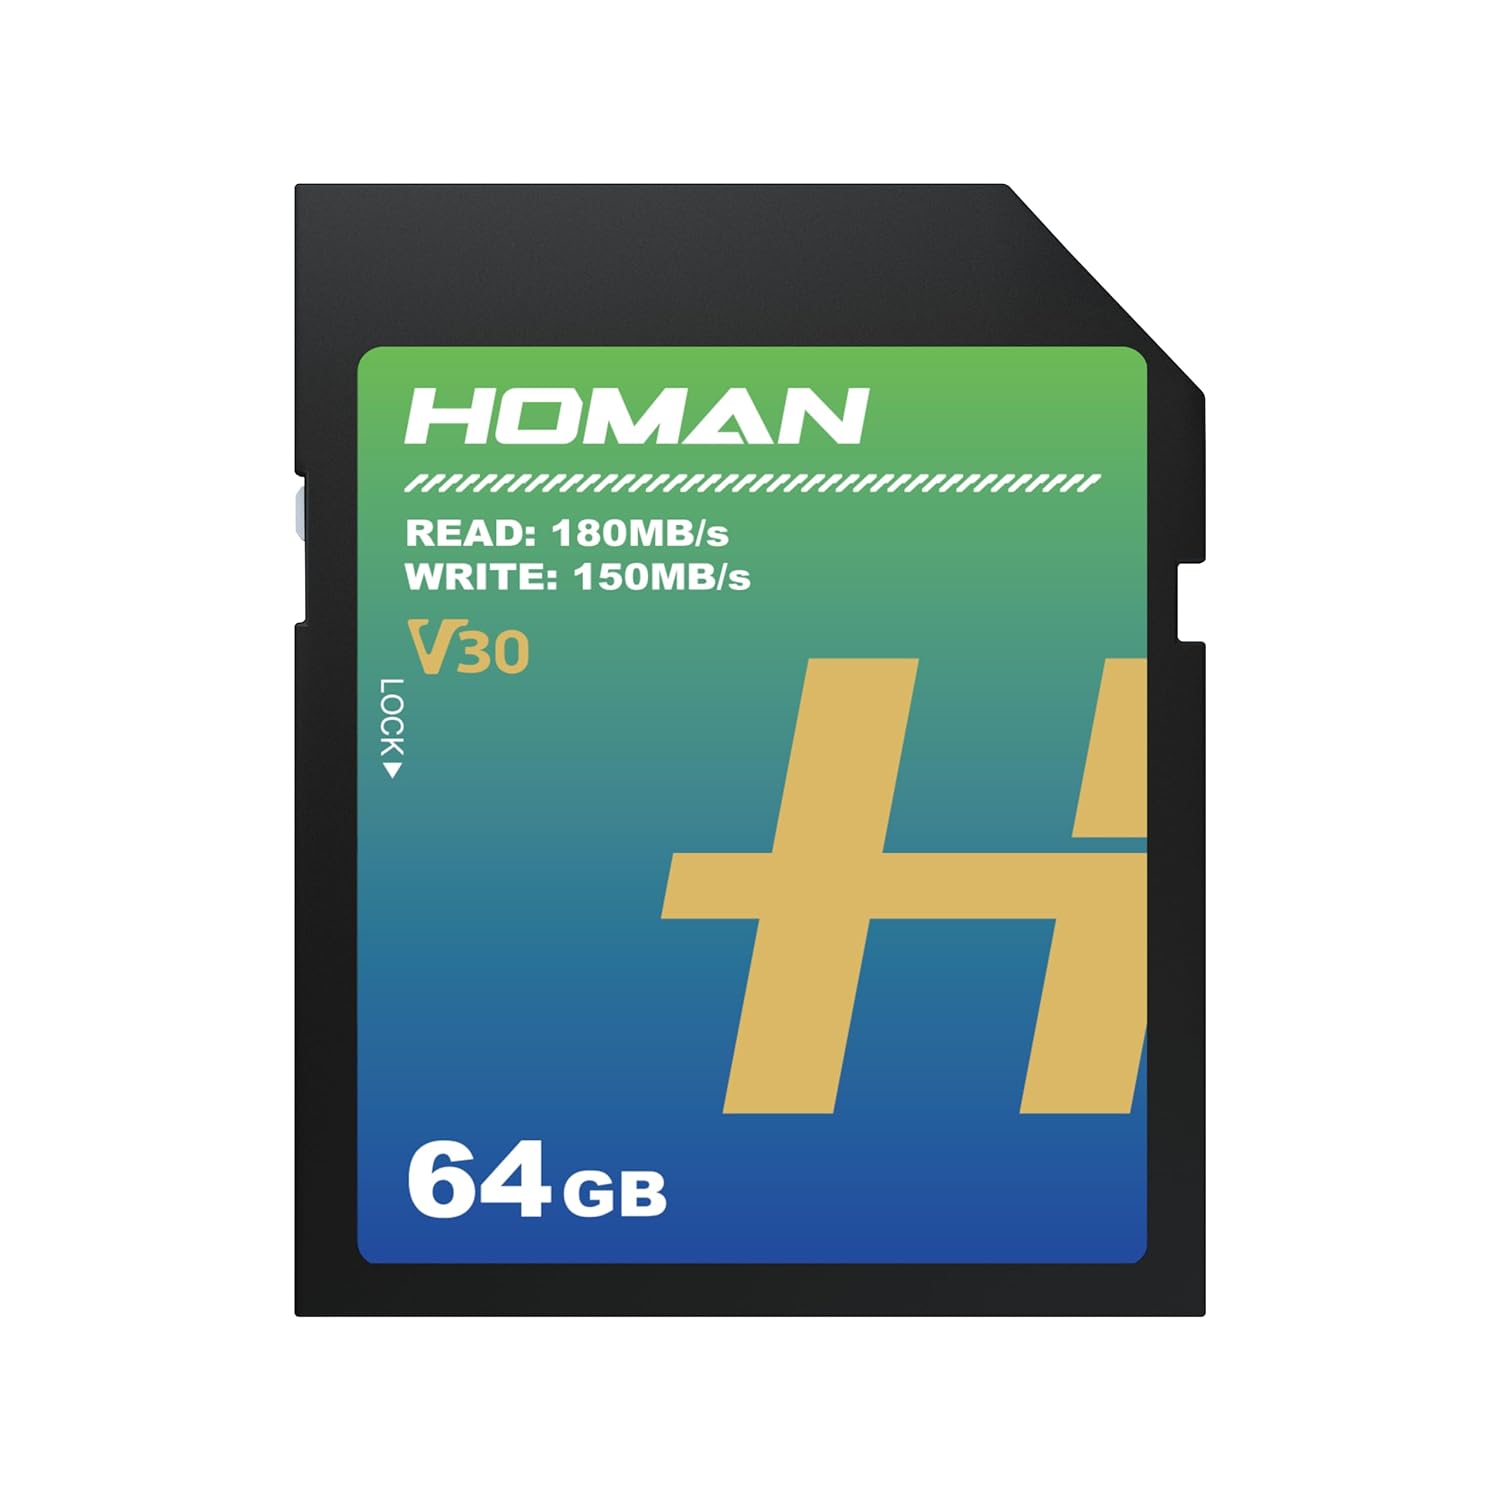 HOMAN UHS-I SD Card (V30) 64GB fit for Any Environmental Temperature from -10 Degree to 70 Degree Celsius with 5 Year Warranty & Recovery